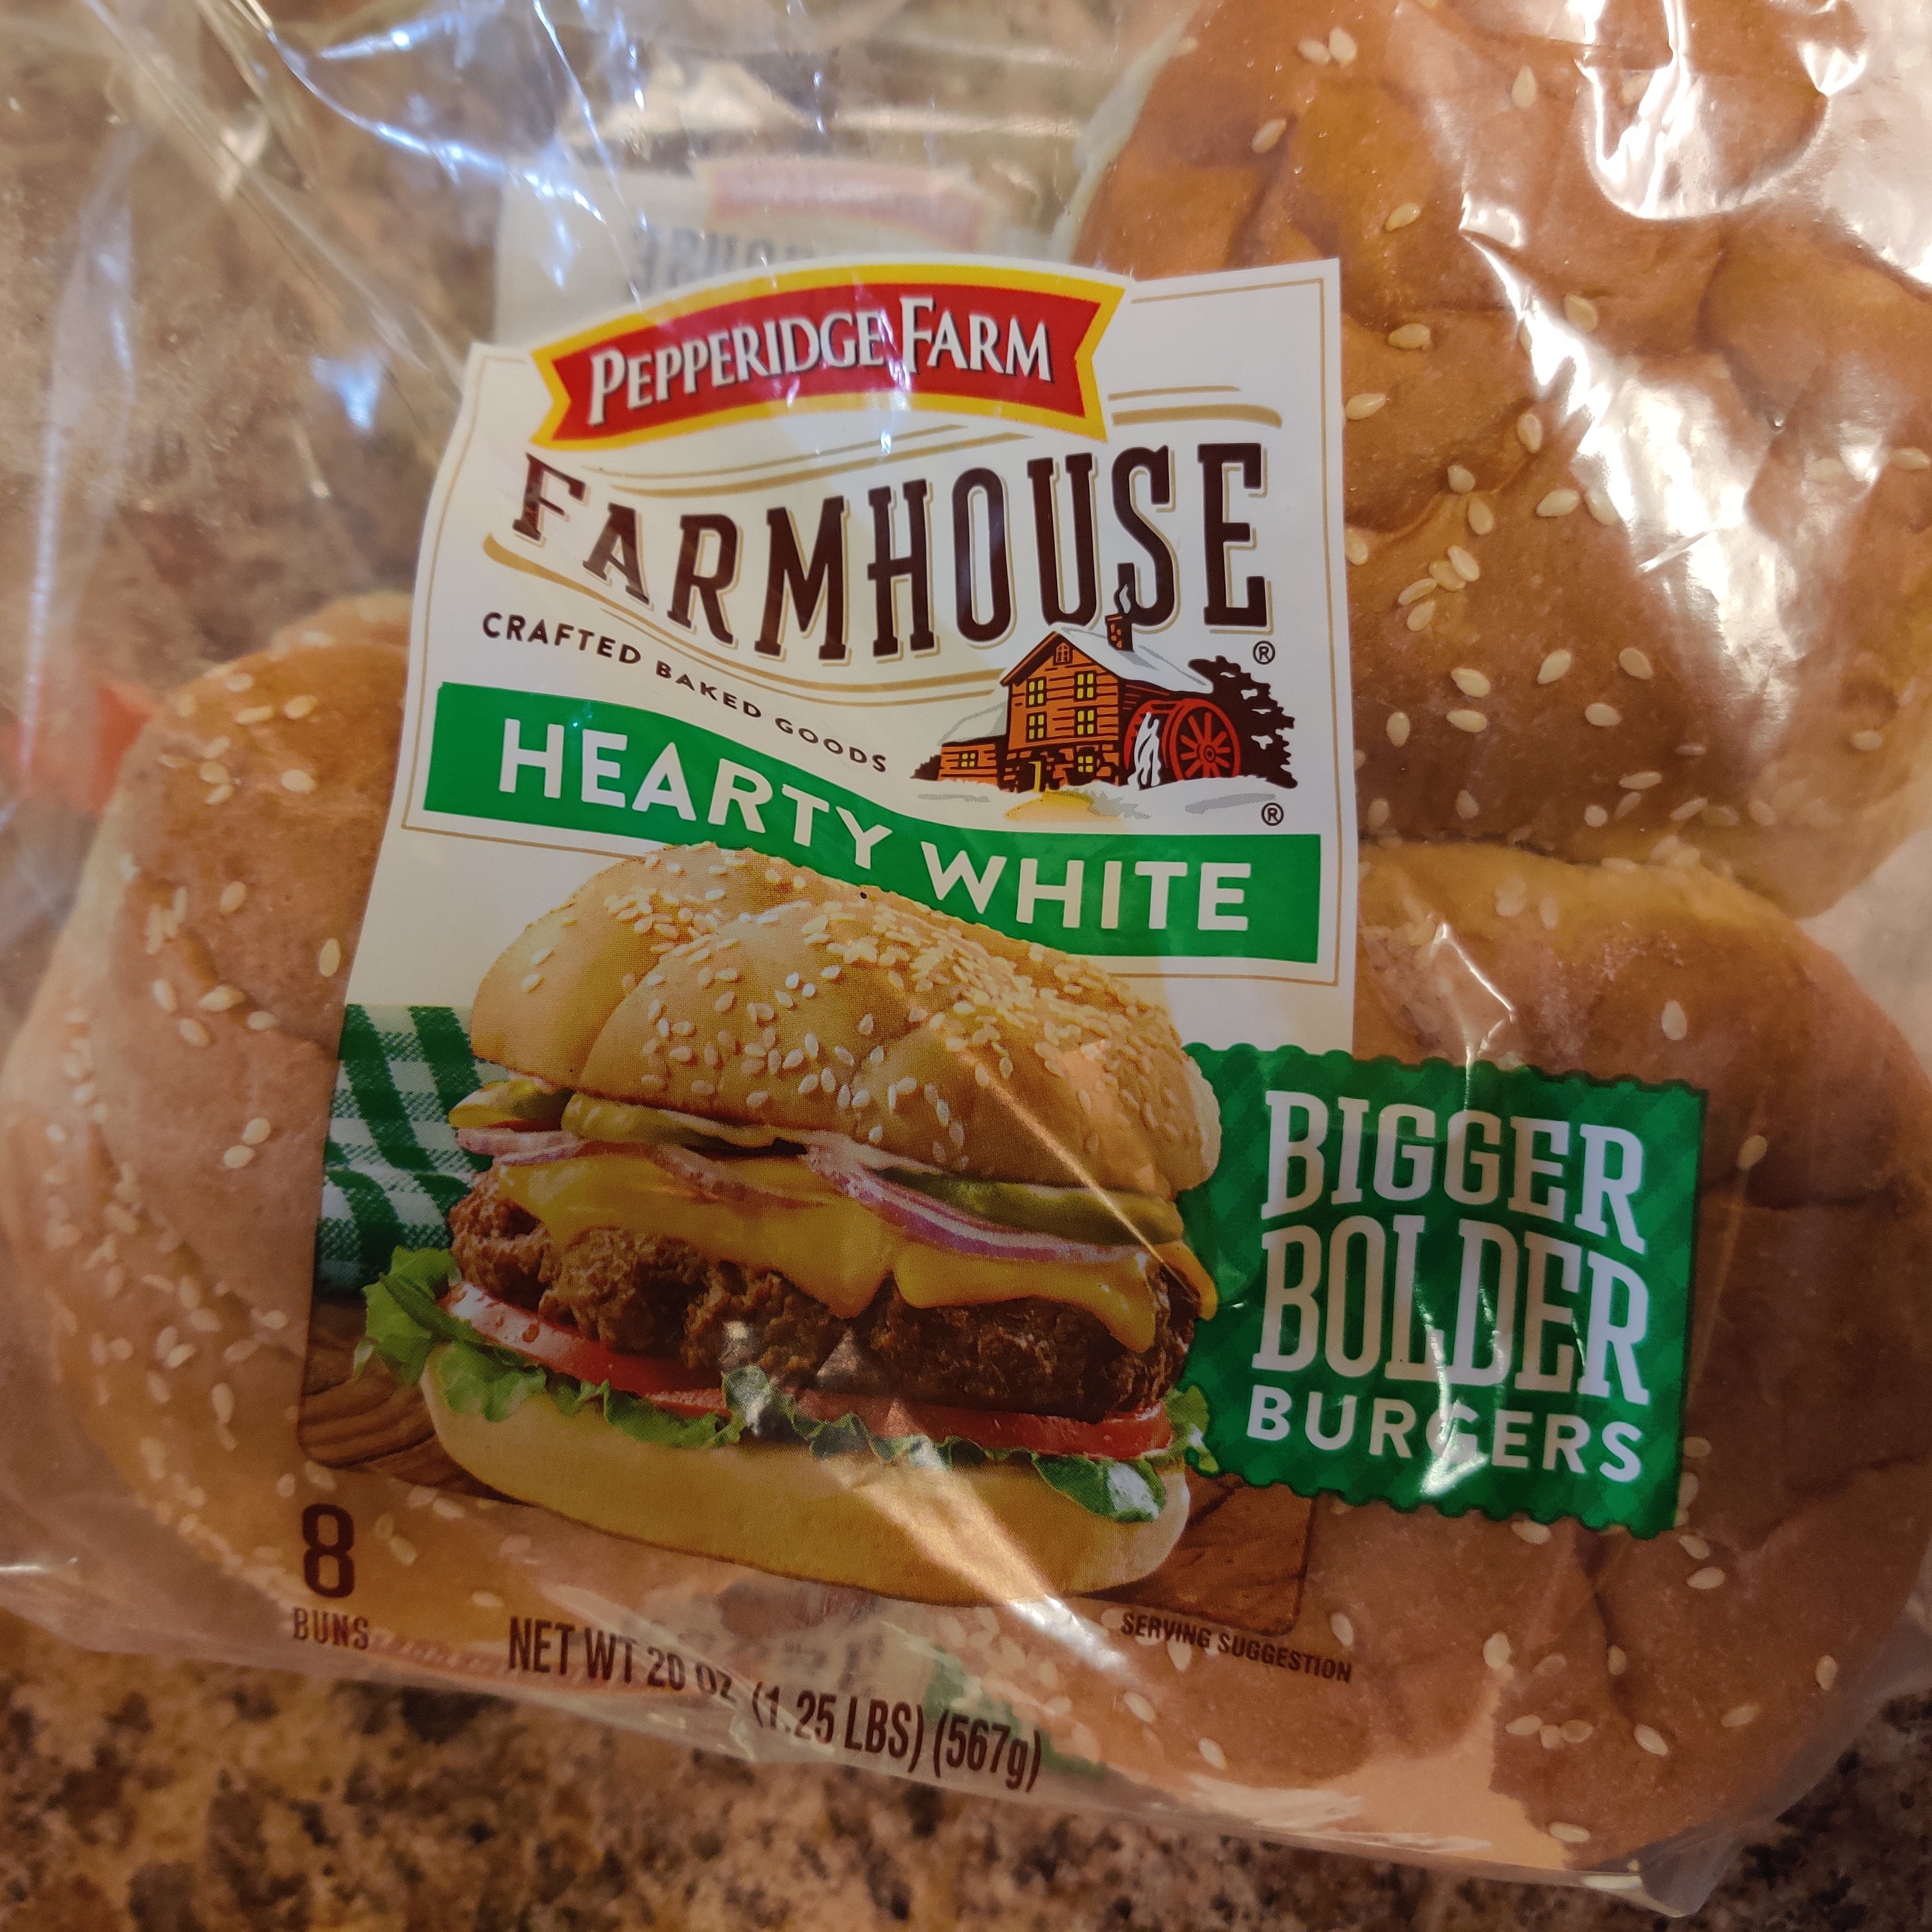 Image of buns in packaging